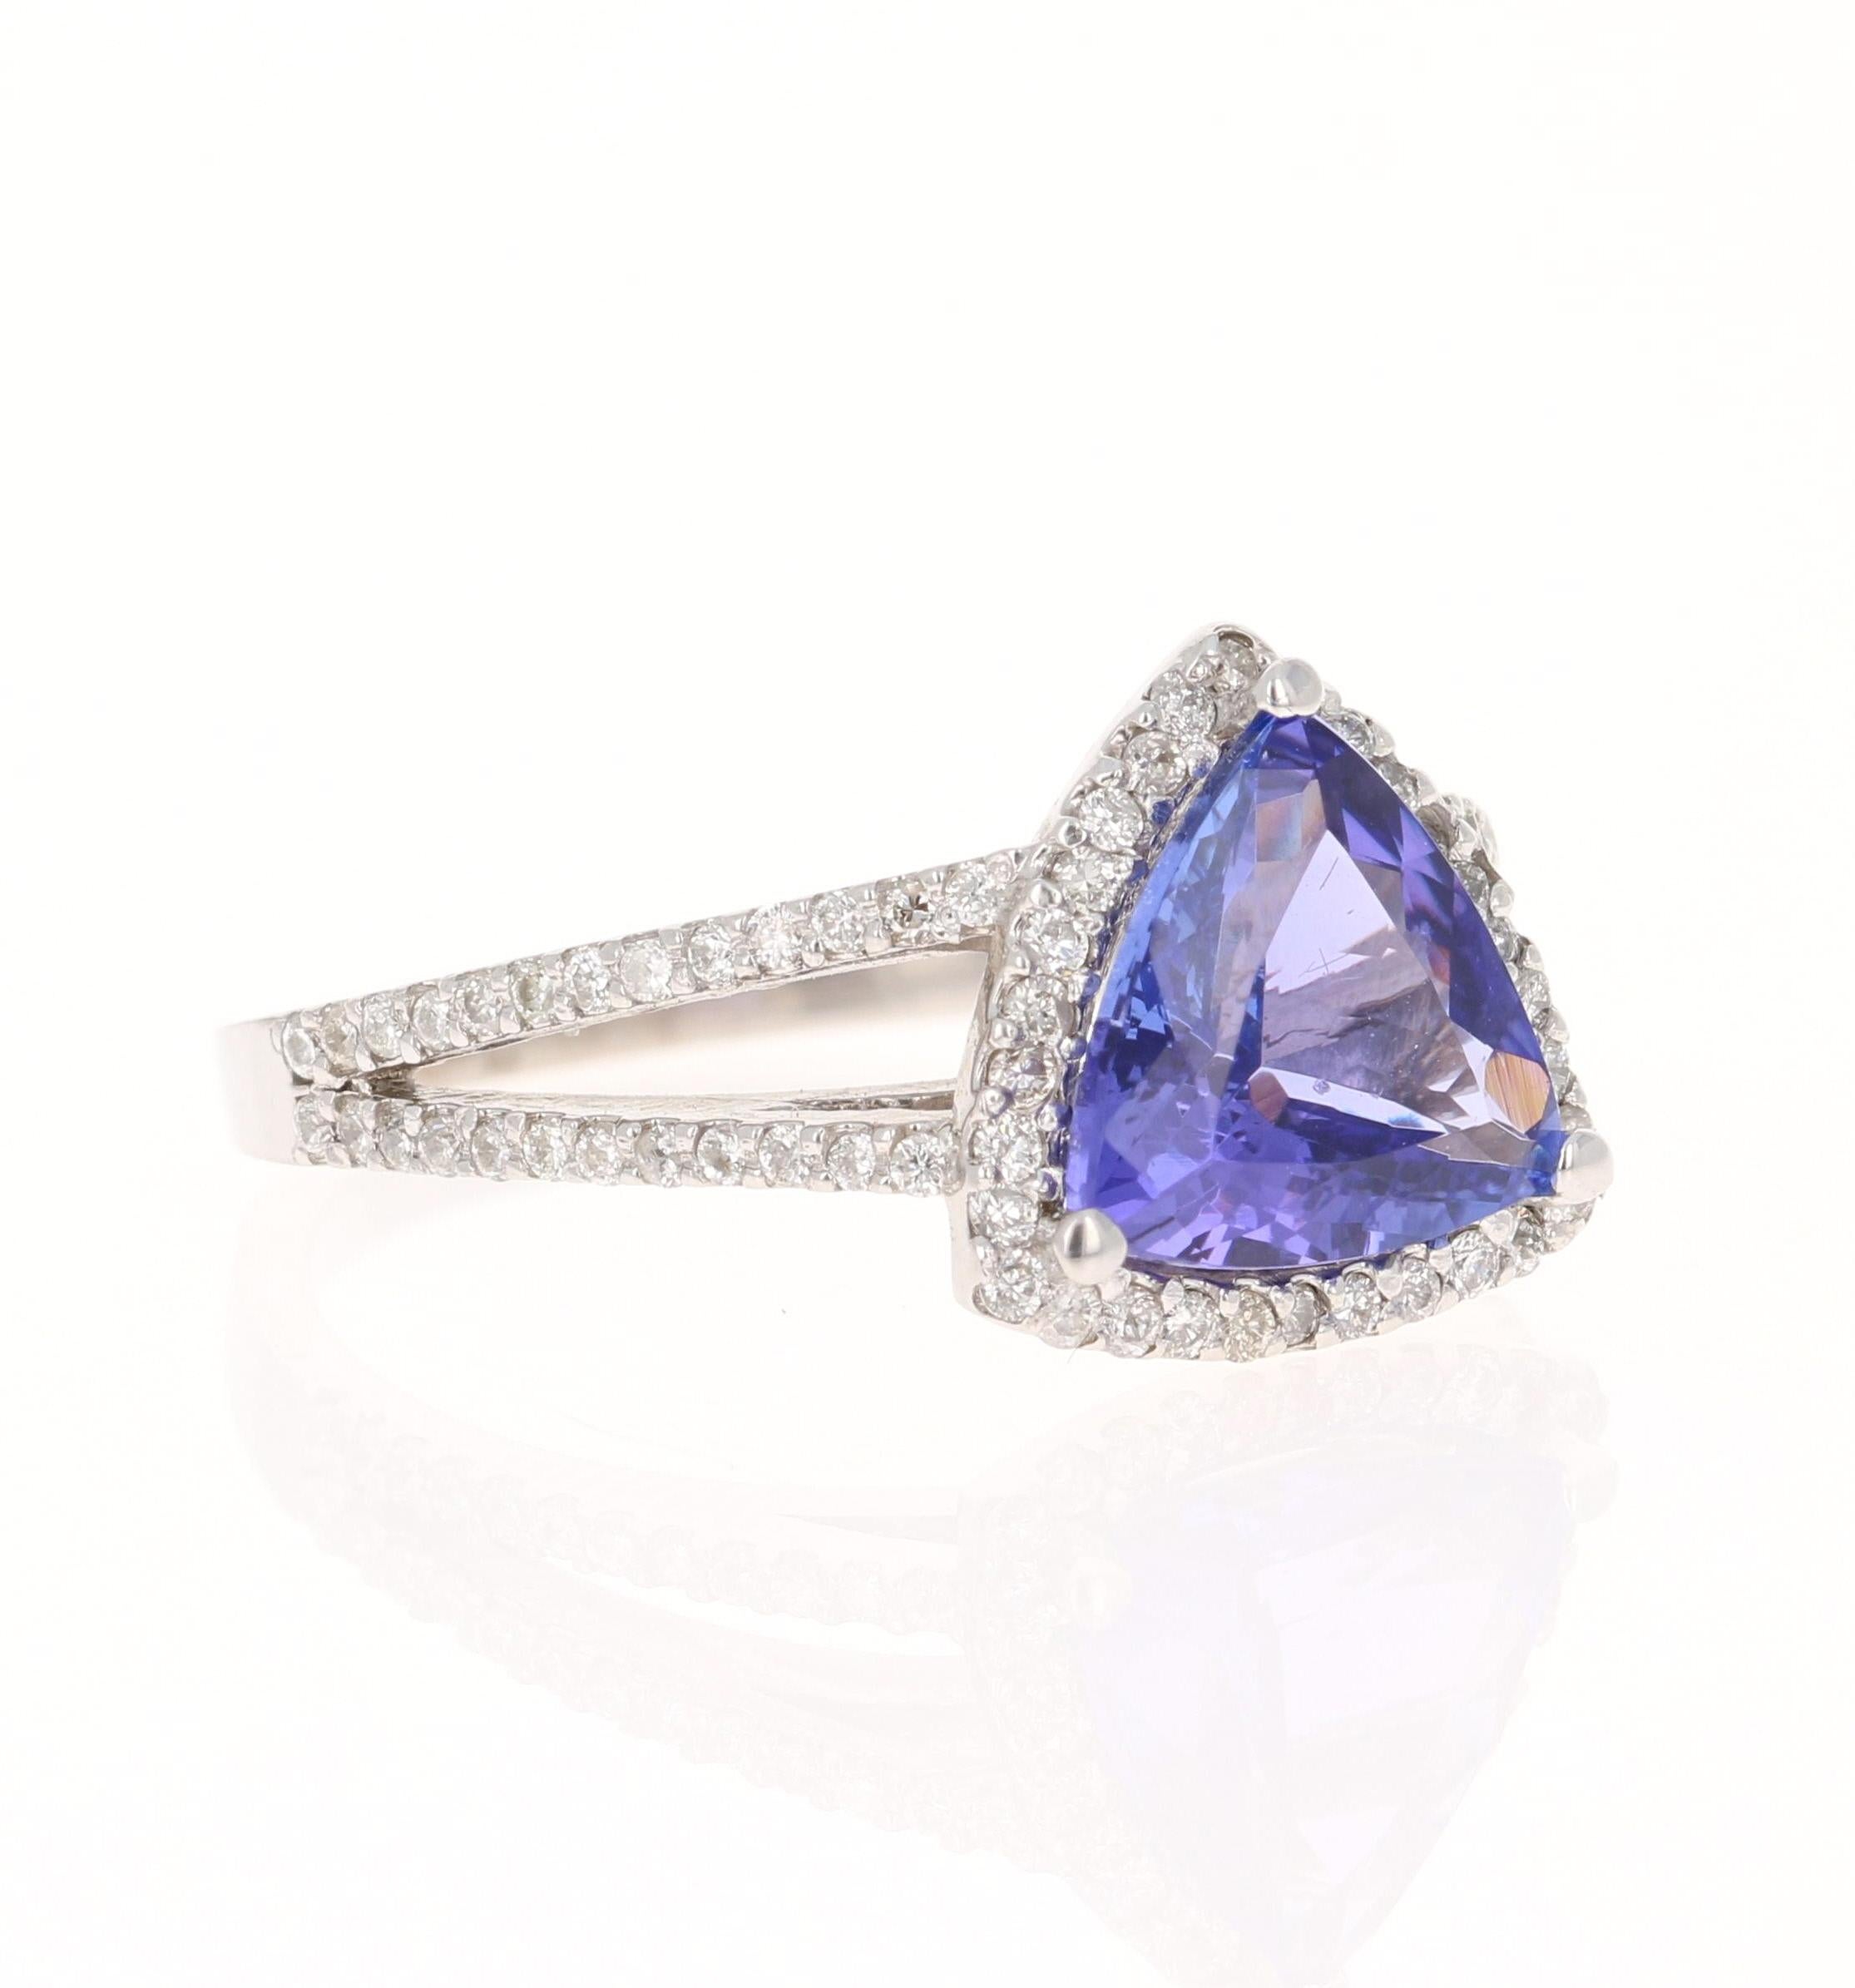 This ring has a gorgeous Trillion Cut Tanzanite that weighs 2.41 Carats. It is surrounded by 78 Round Cut Diamonds that weigh 0.40 Carats. The total carat weight of the ring is 2.81 carats. 

Elegantly set in 14 Karat White Gold and weighs